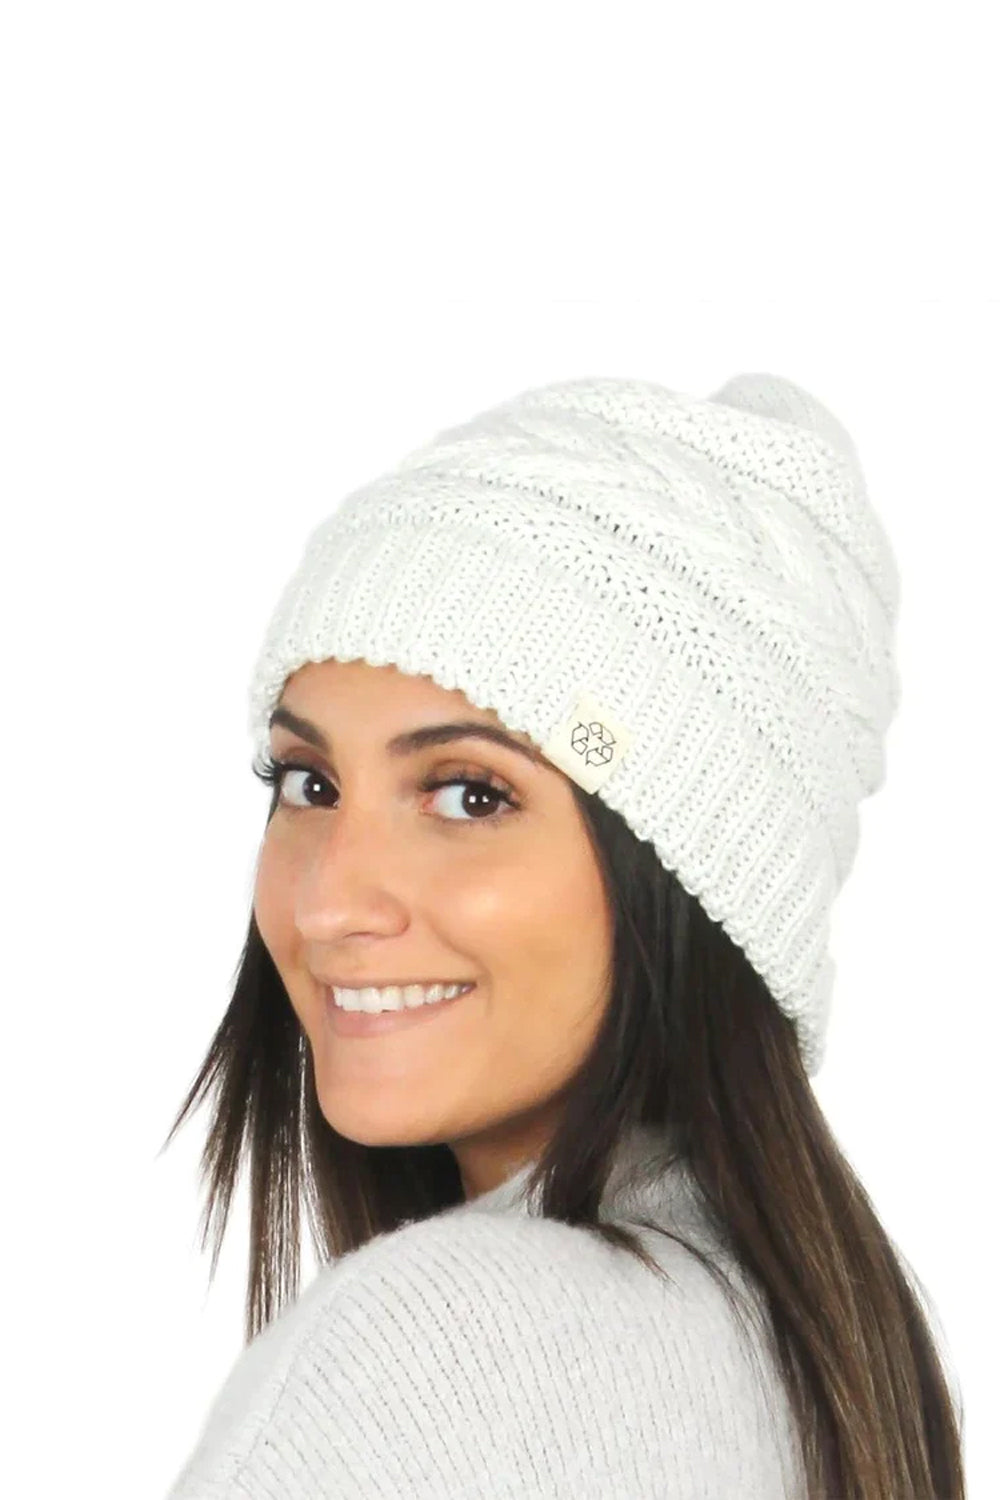 David and Young Eco-Product! Horizontal Braided Knit Beanie